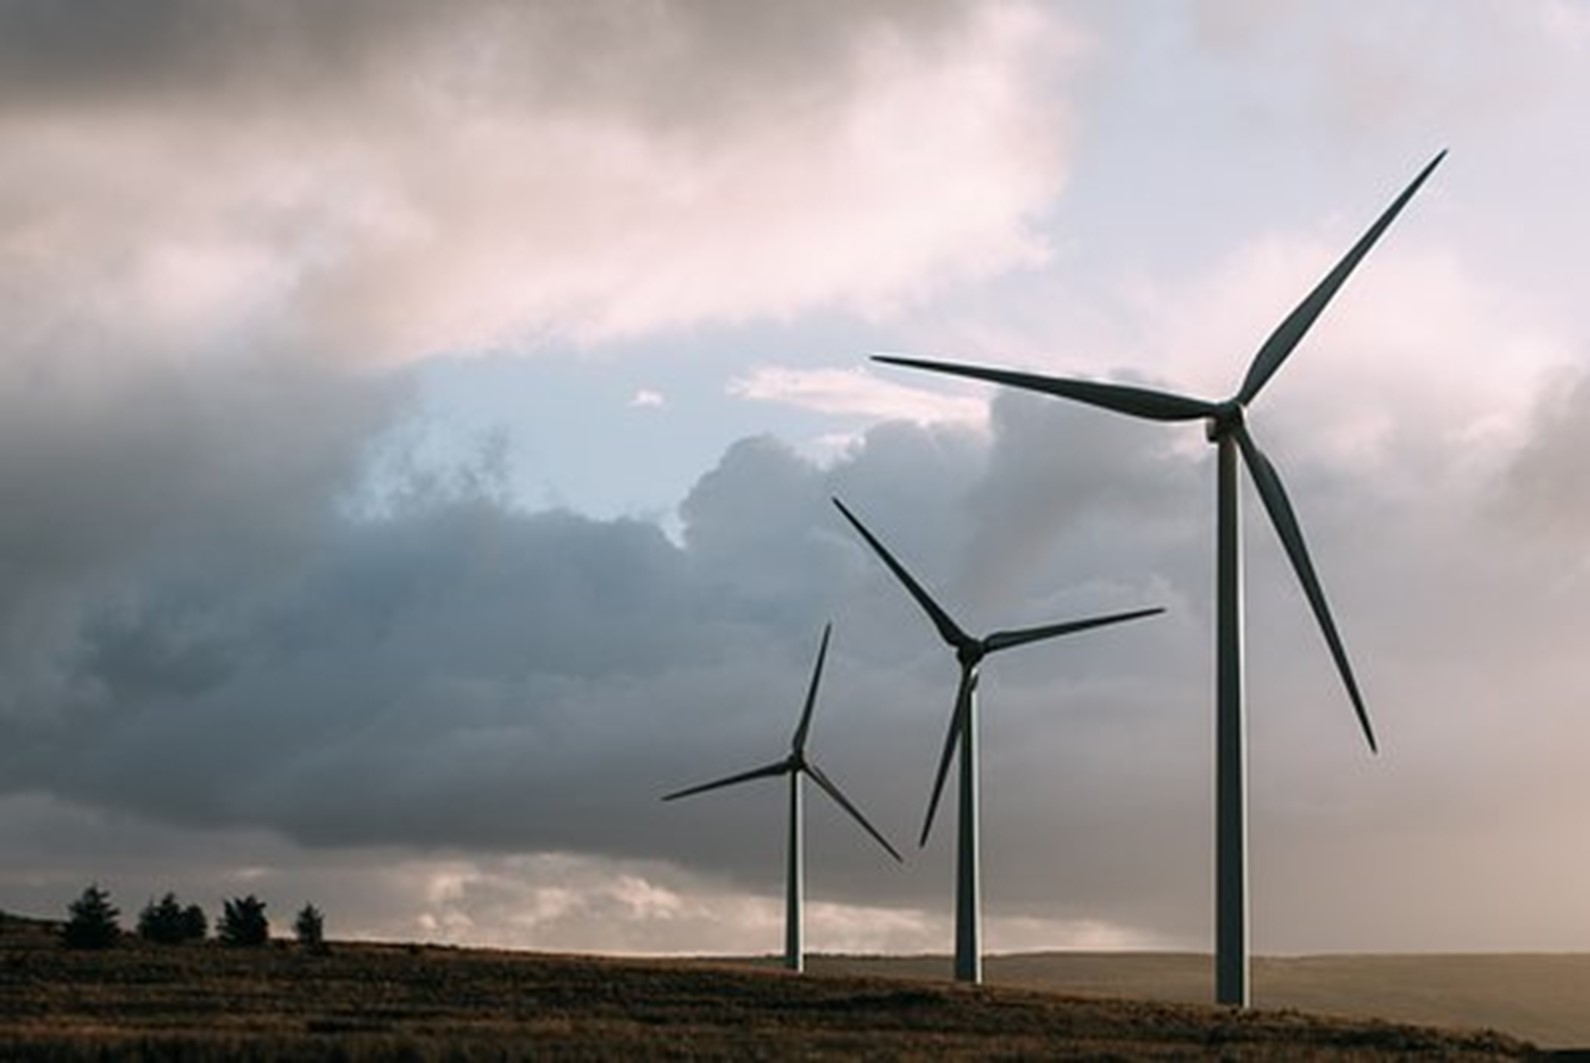 Three large wind turbines in a flat meadow rise towards a cloudy sky